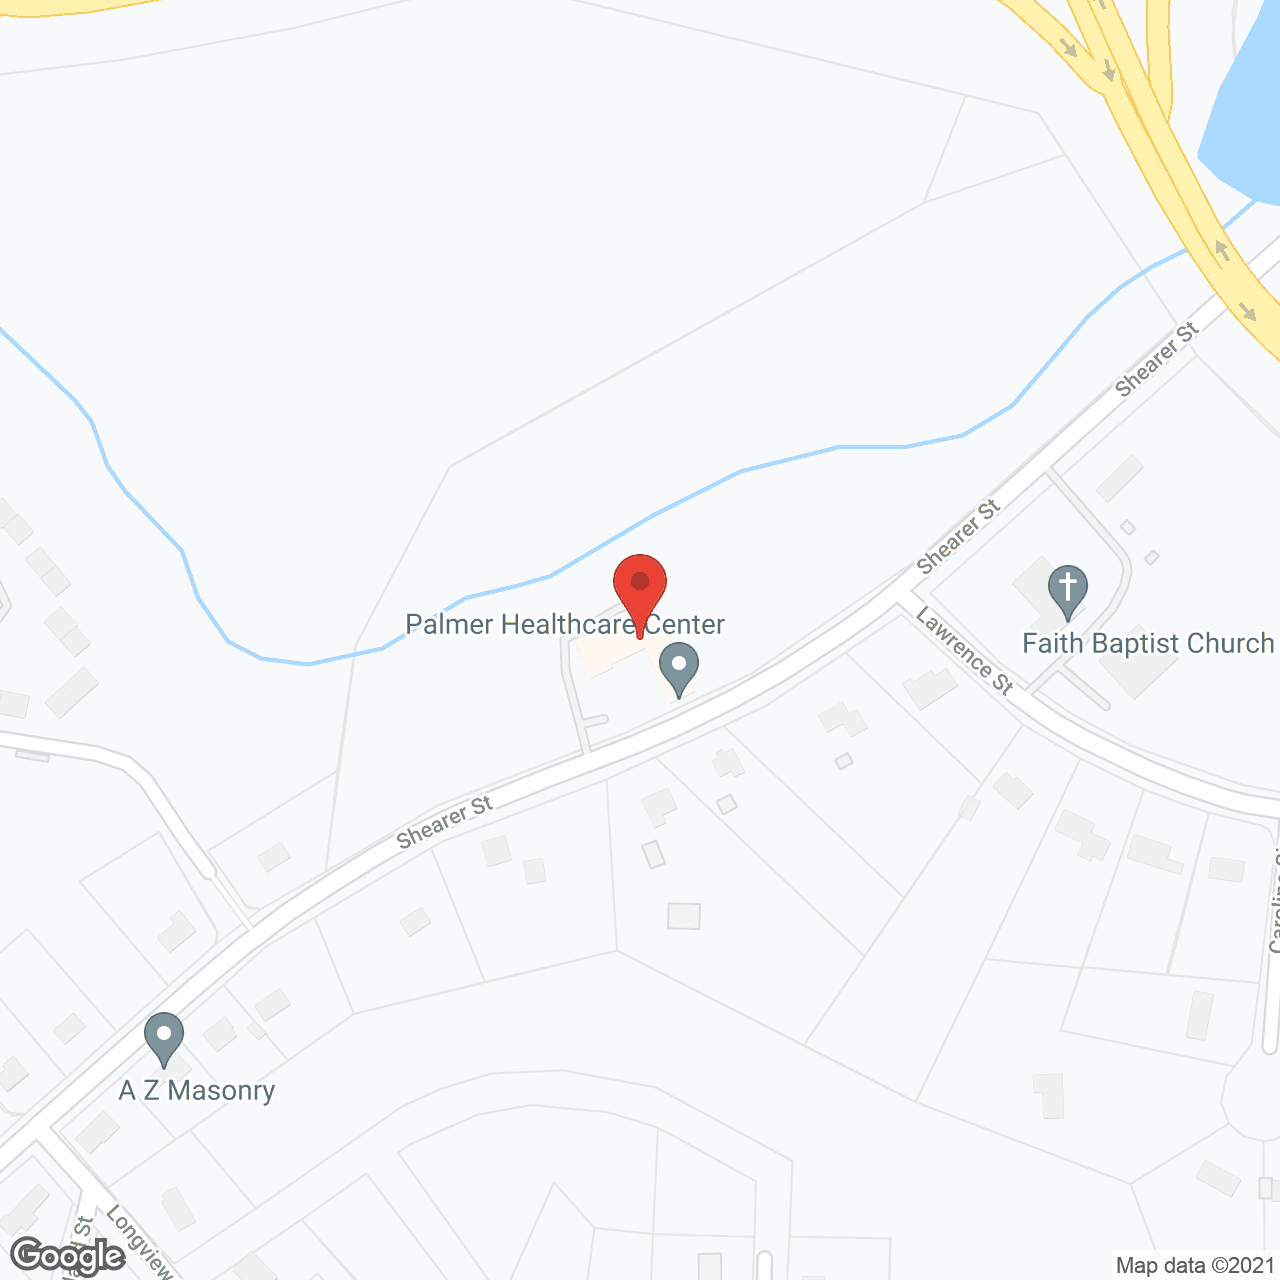 Palmer House Alzheimers Ctr in google map